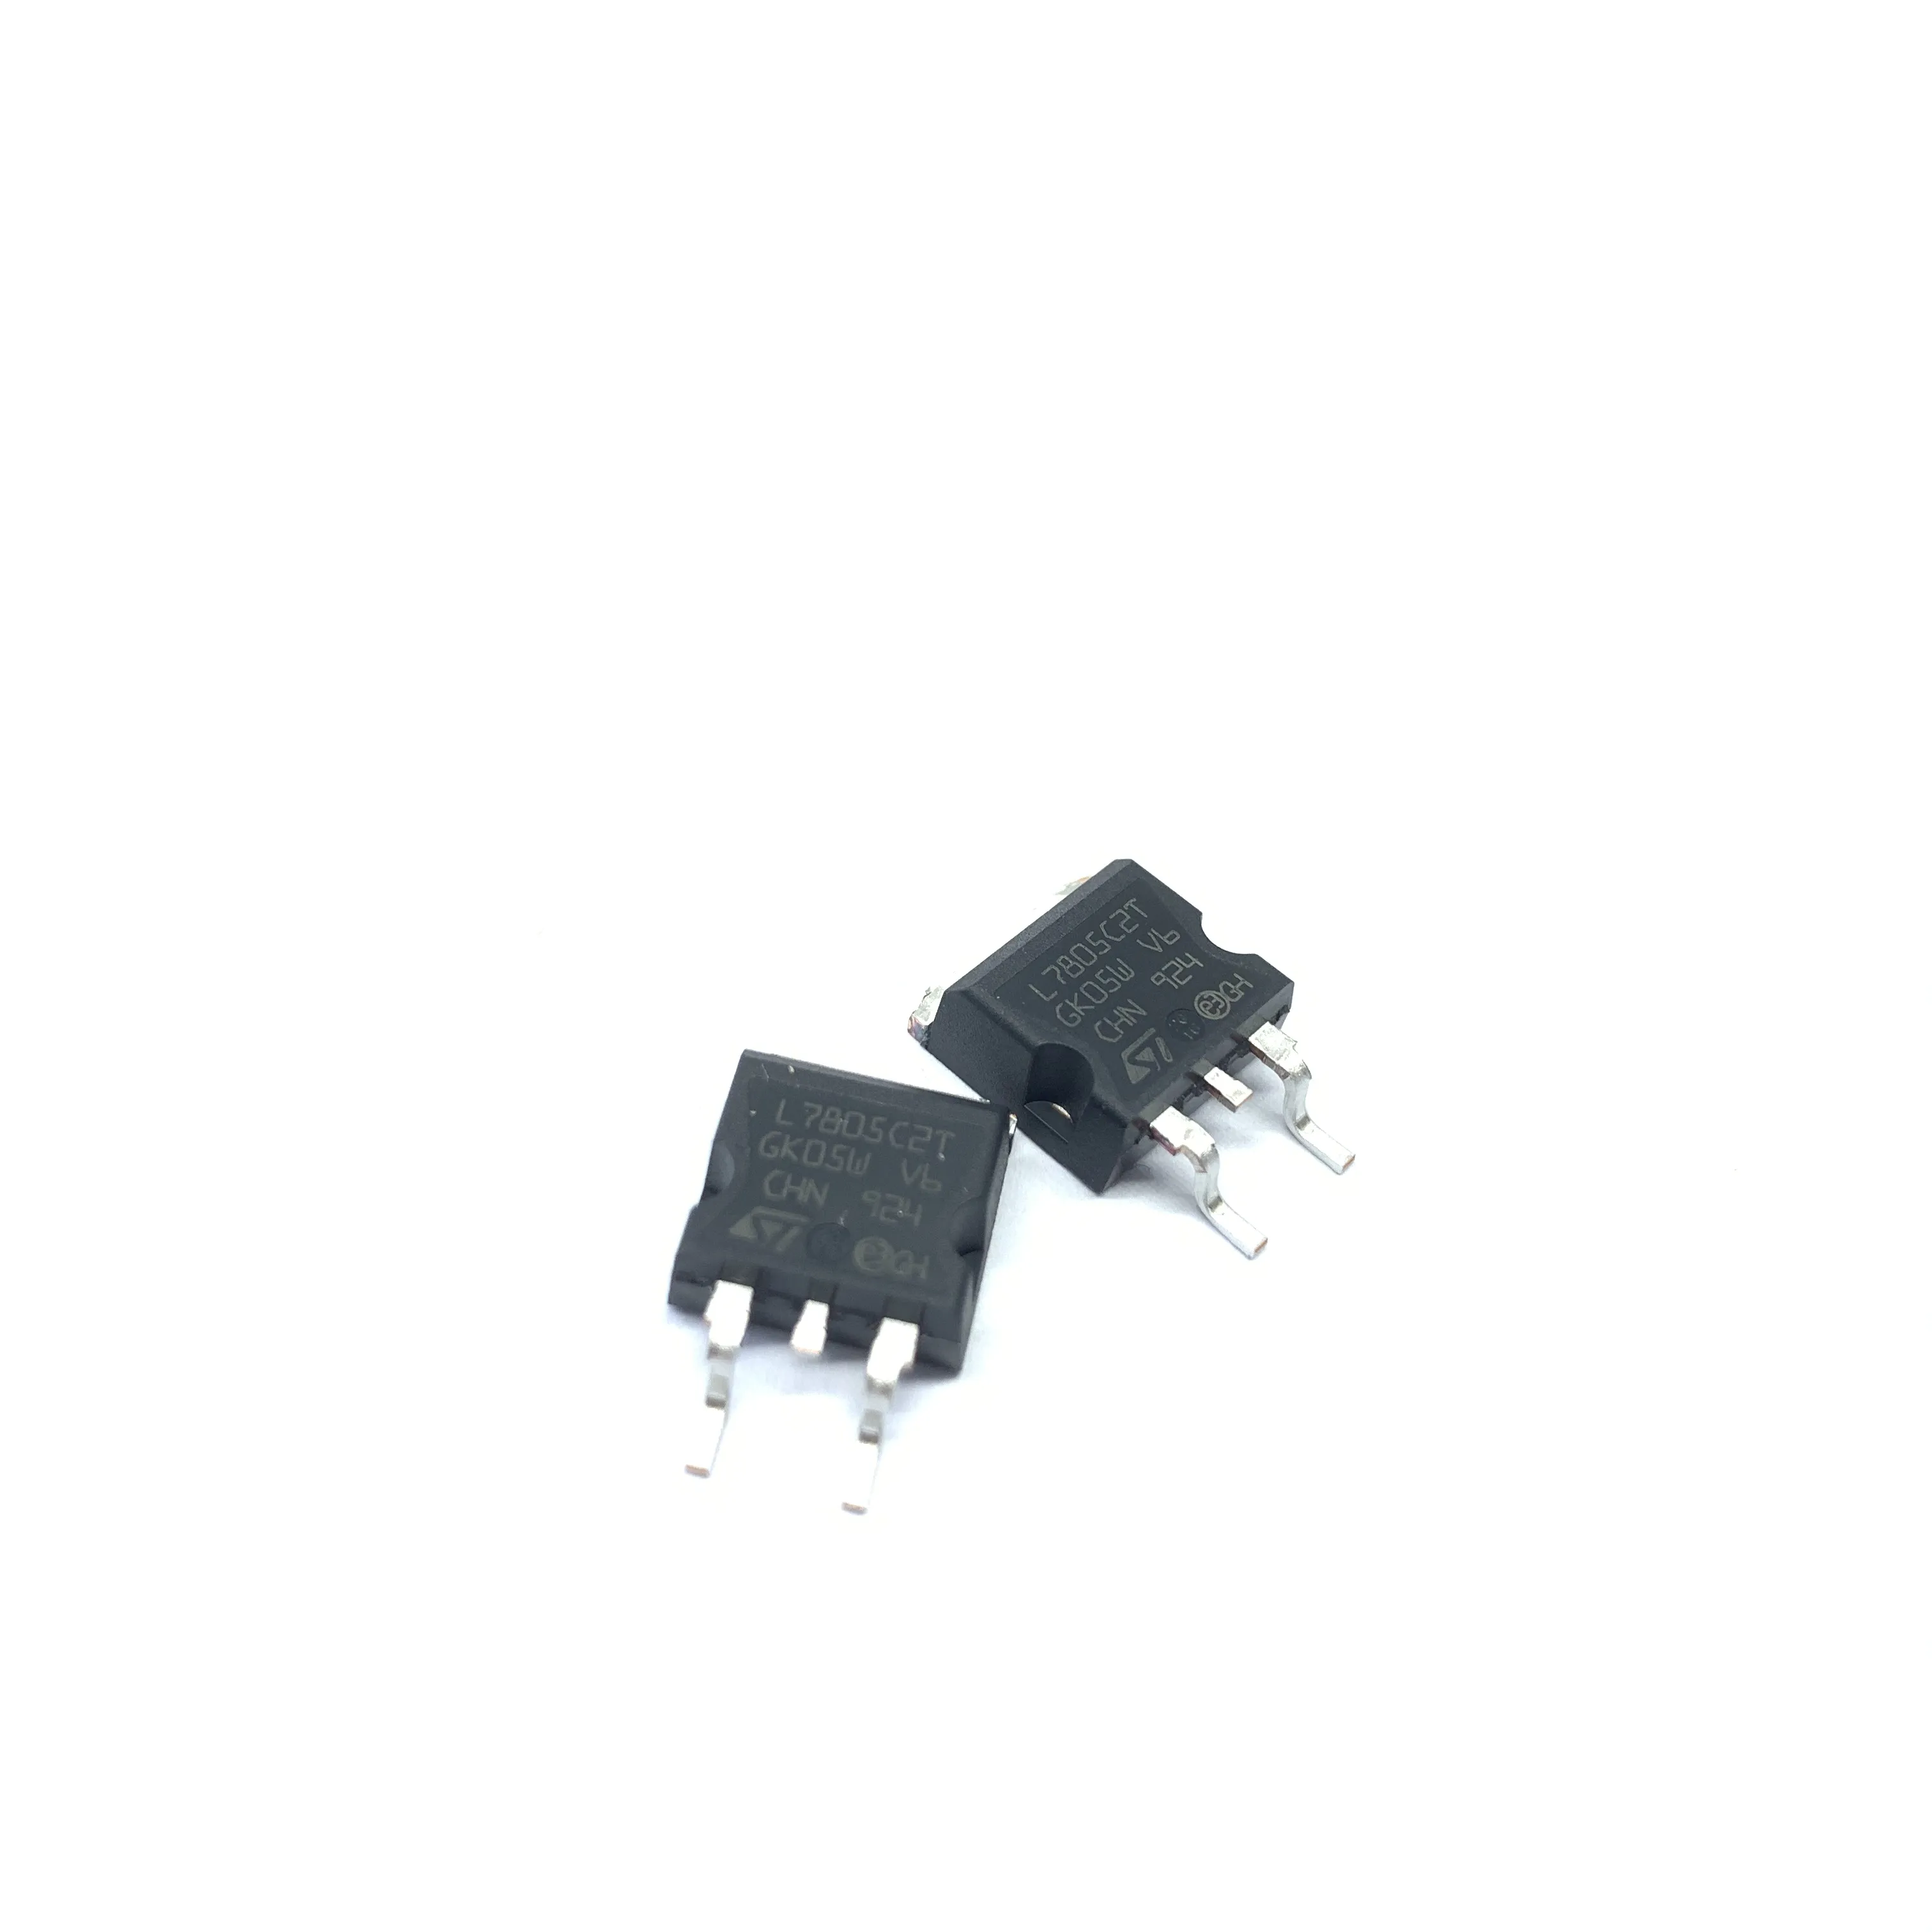 Electronic Smd Components SMD SMT L7805ABD2T-TR IC Chips LED Driver Backlight DIY Smd Components